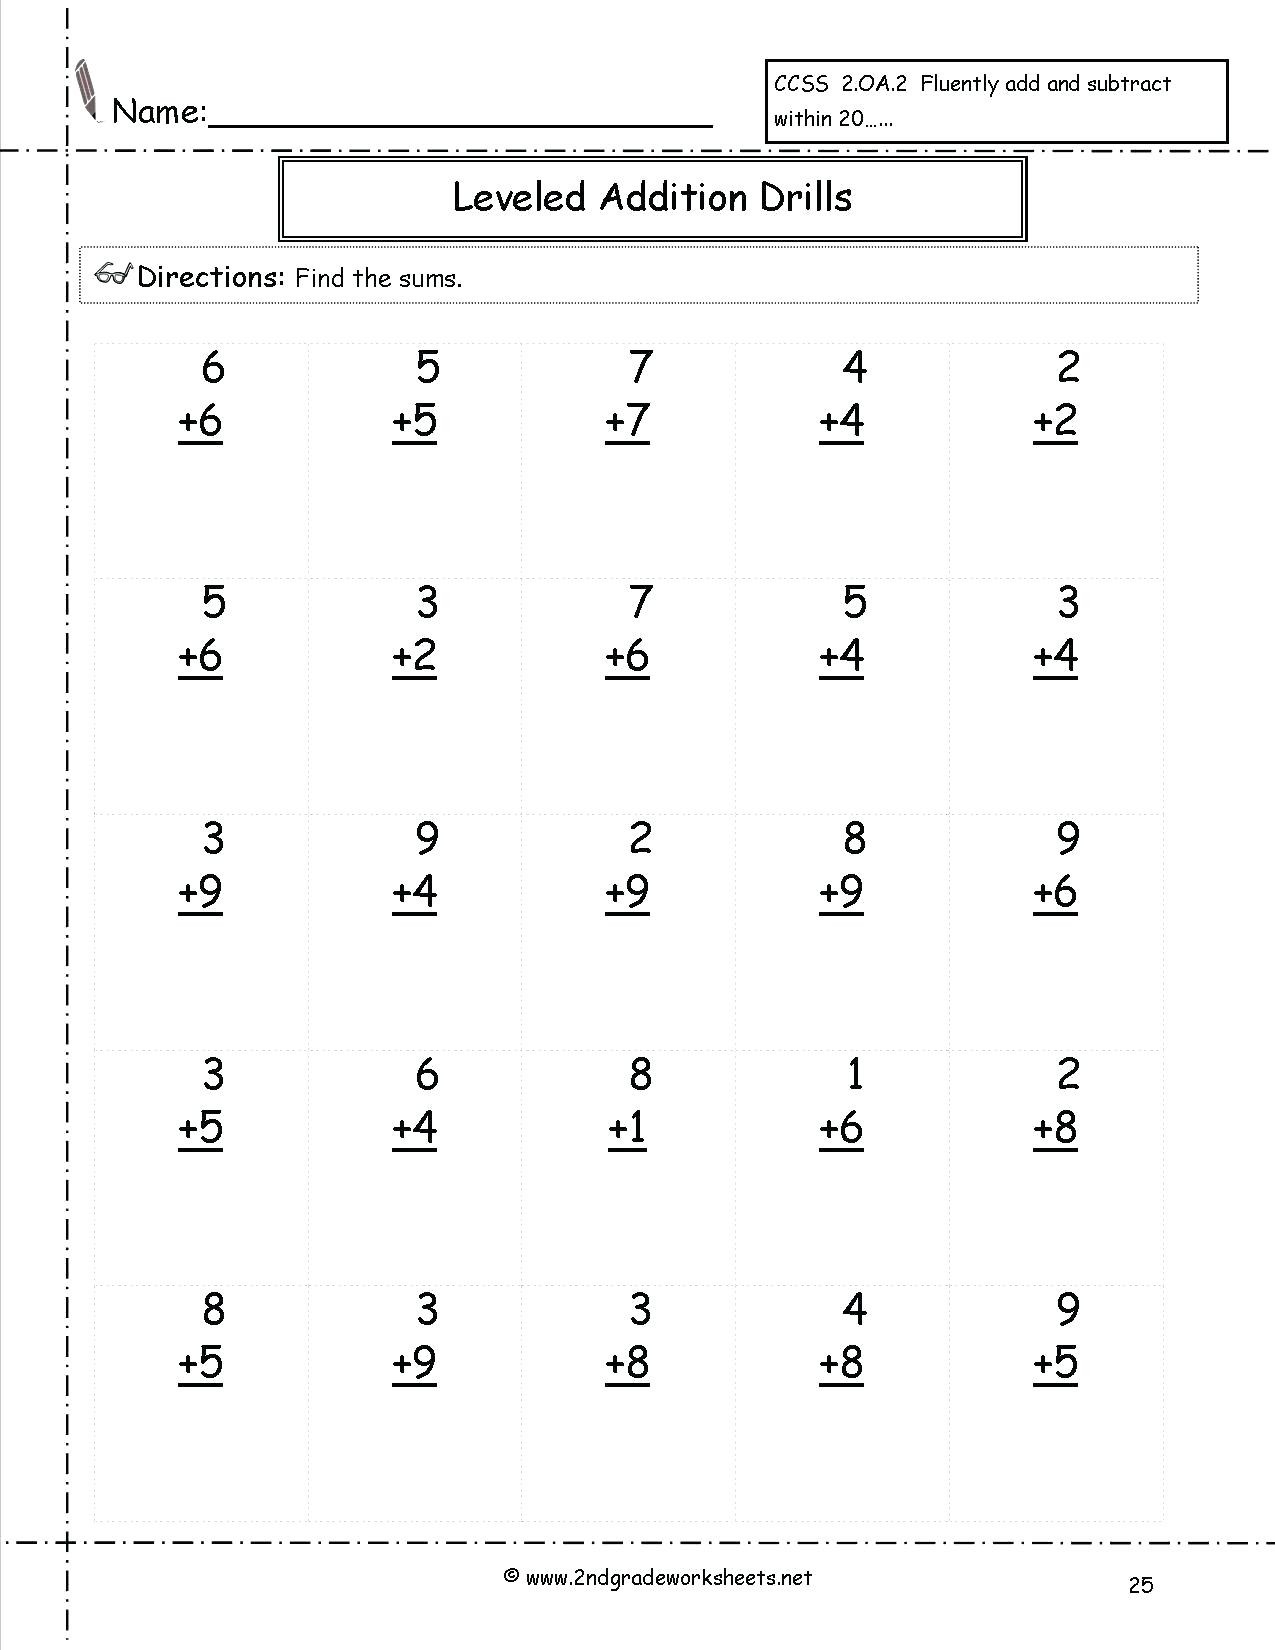 Free Math Worksheets Third Grade 3 Counting Money Money In Words